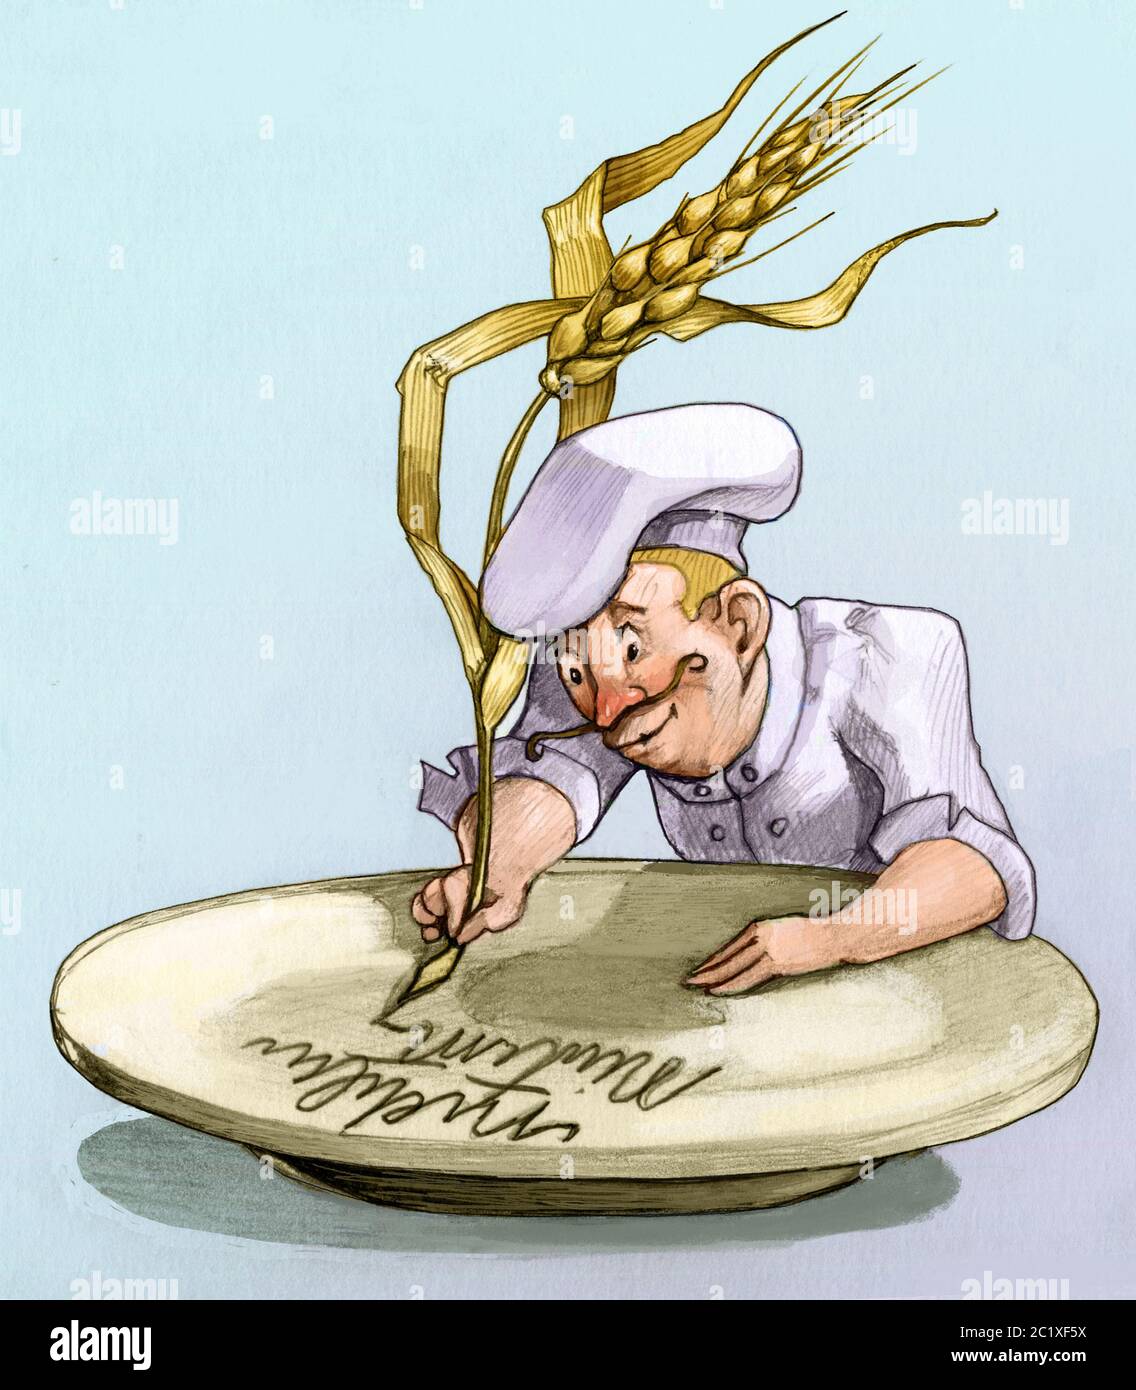 a cute and paiionatepoet Cook writes in the dish with wheat ear Stock Photo